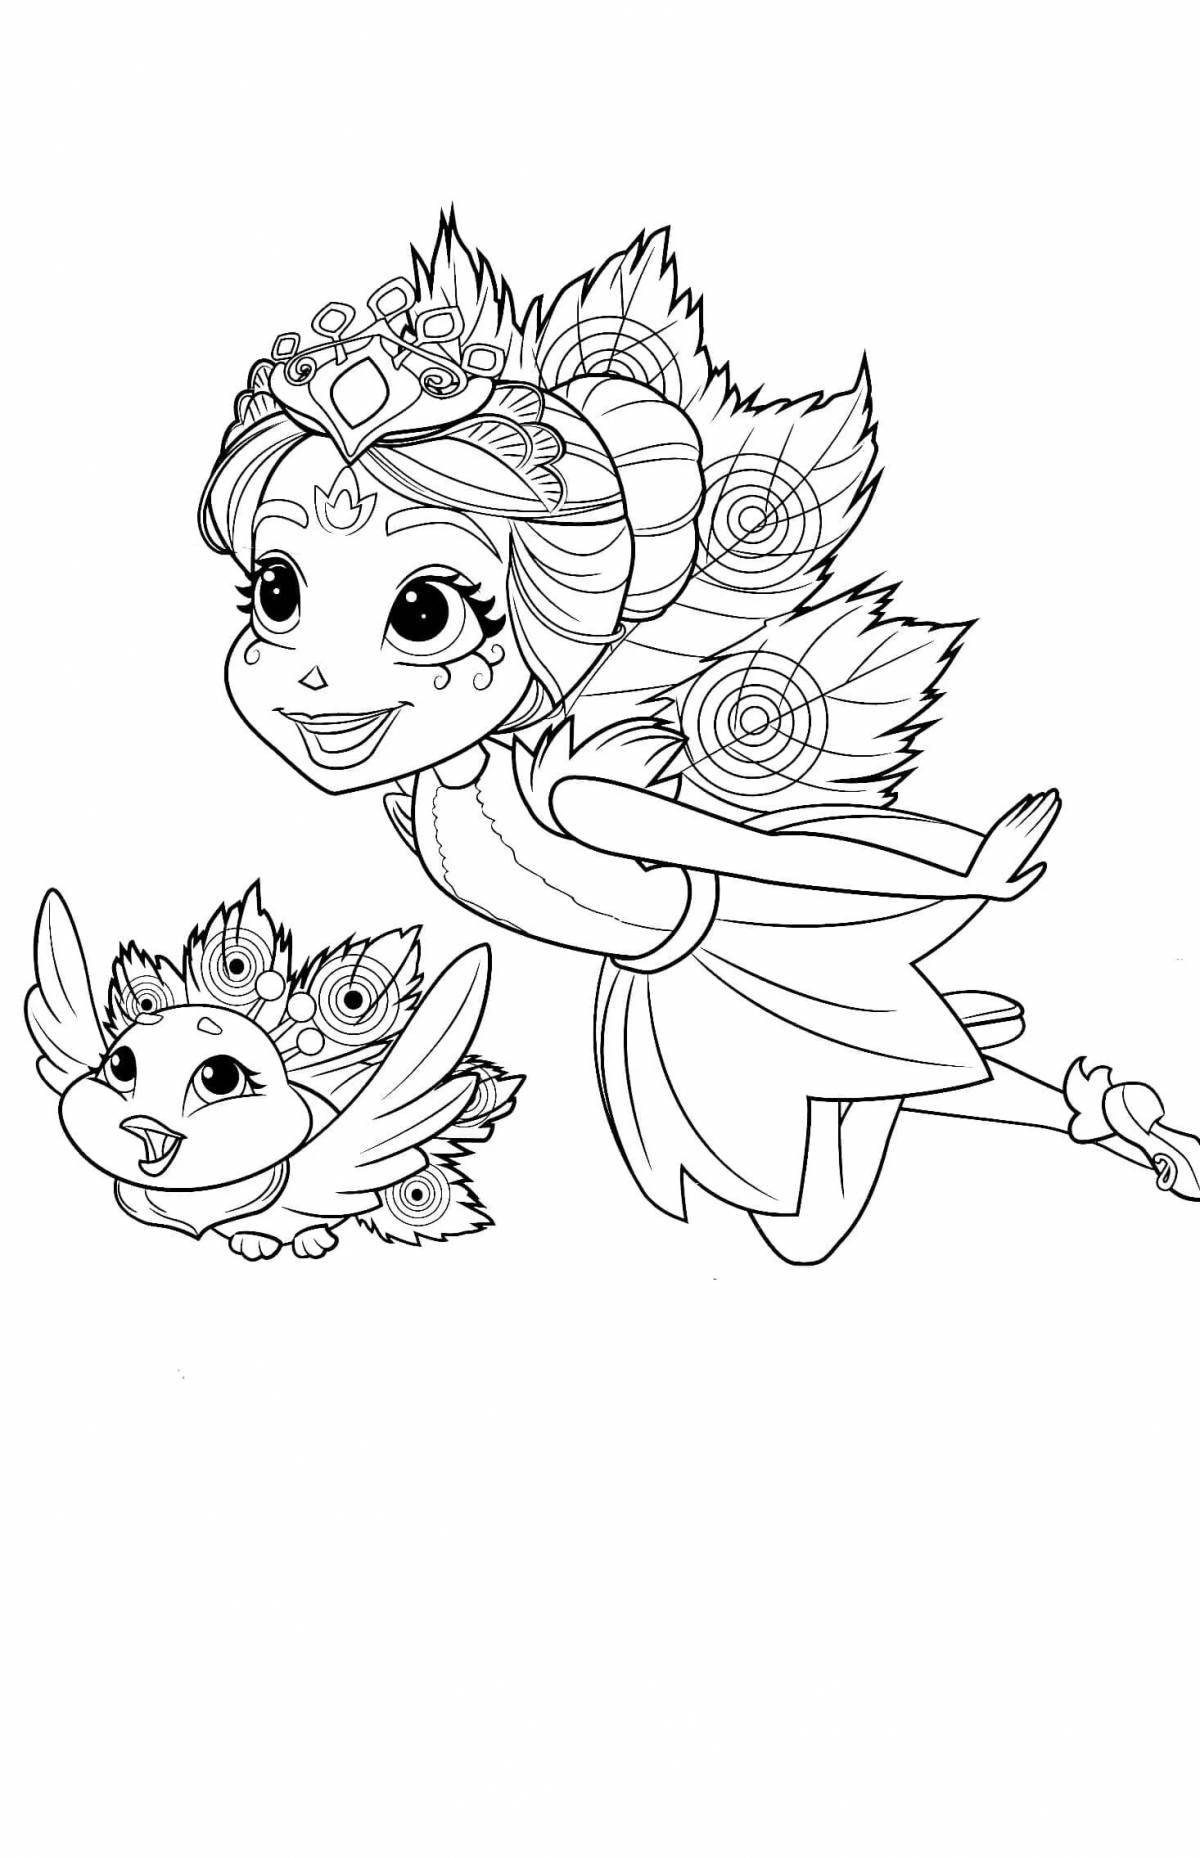 Glorious inchanchymus coloring page